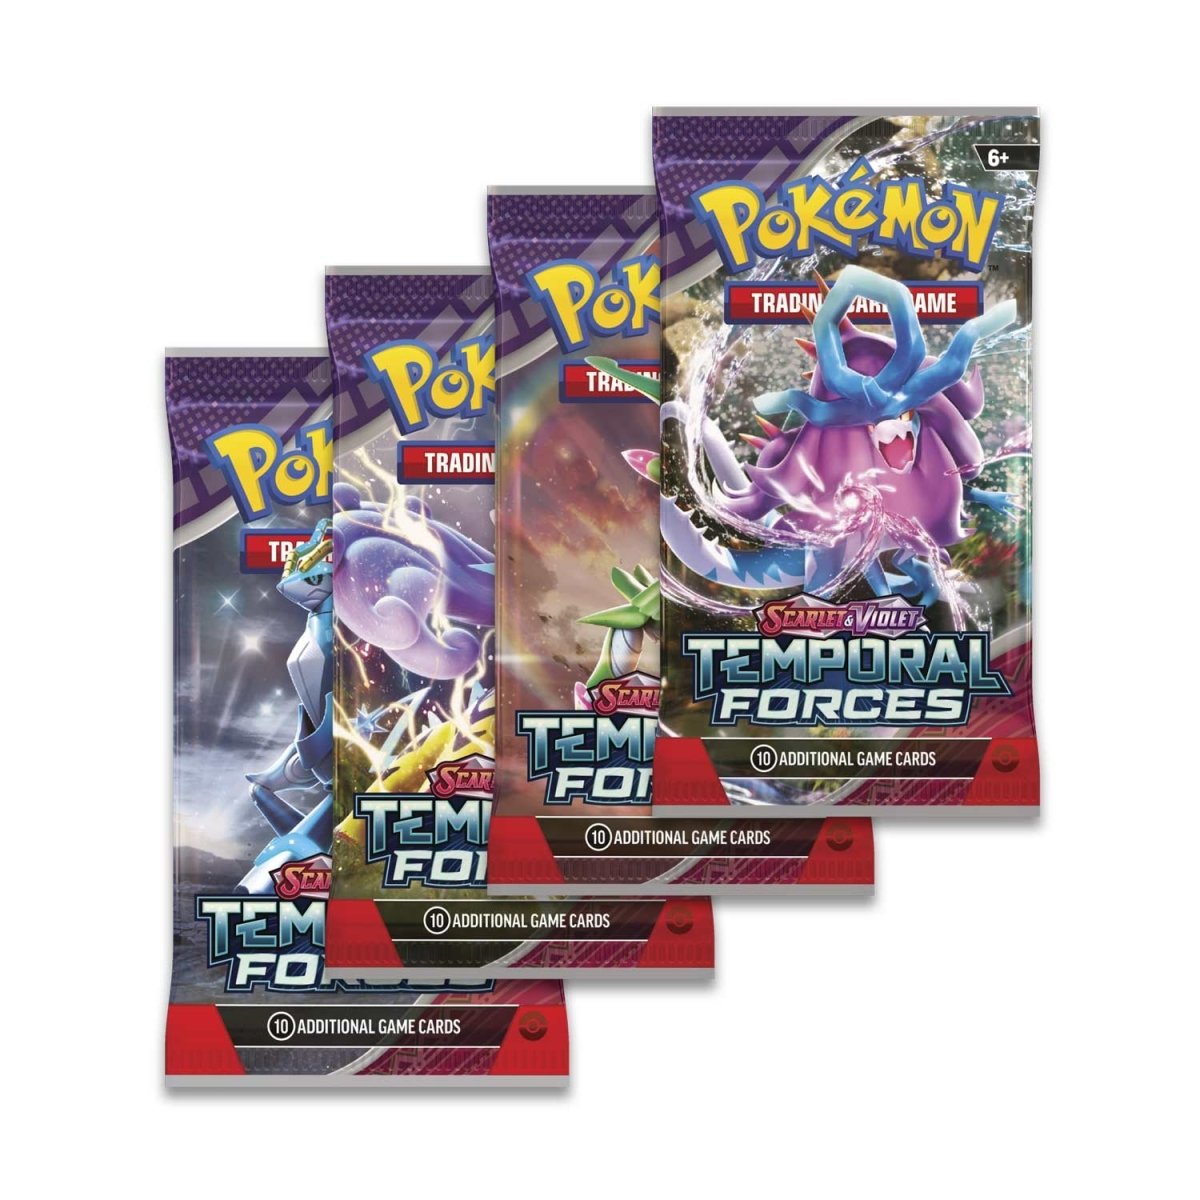 Pokémon TCG: Temporal Forces Booster Pack